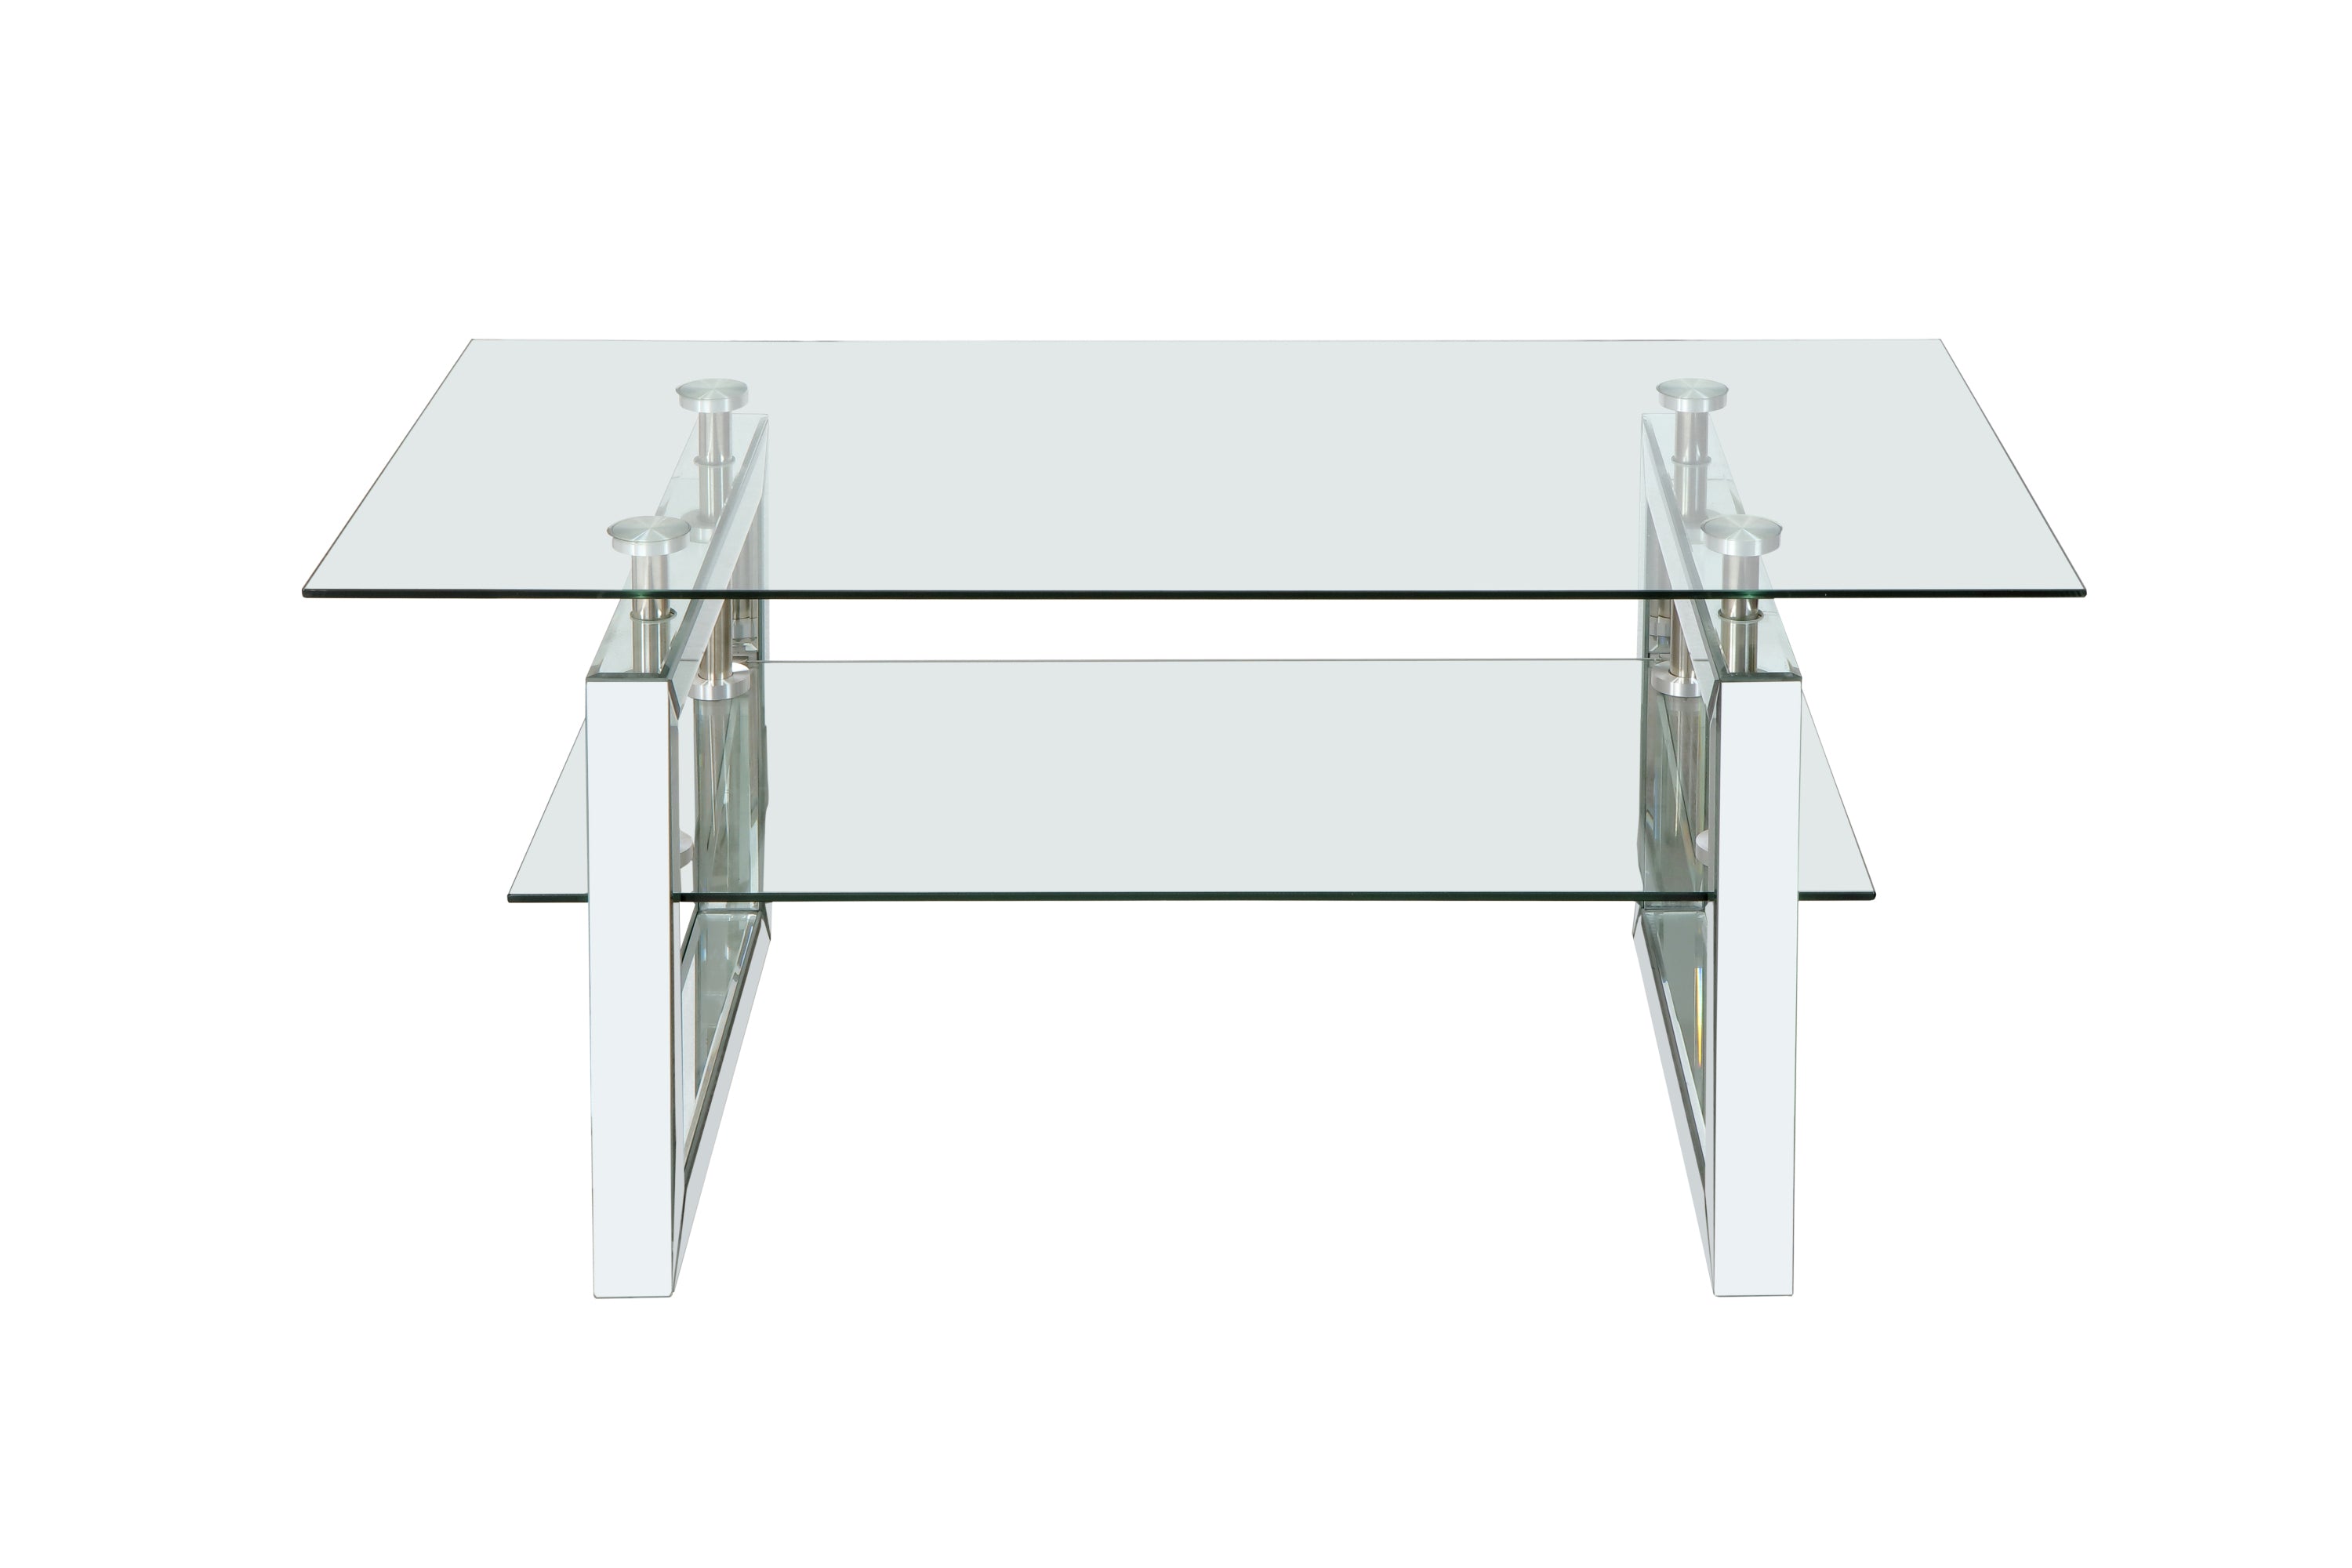 W 39.4" X D 19.7 " X H 17.7" Transparent tempered glass coffee table